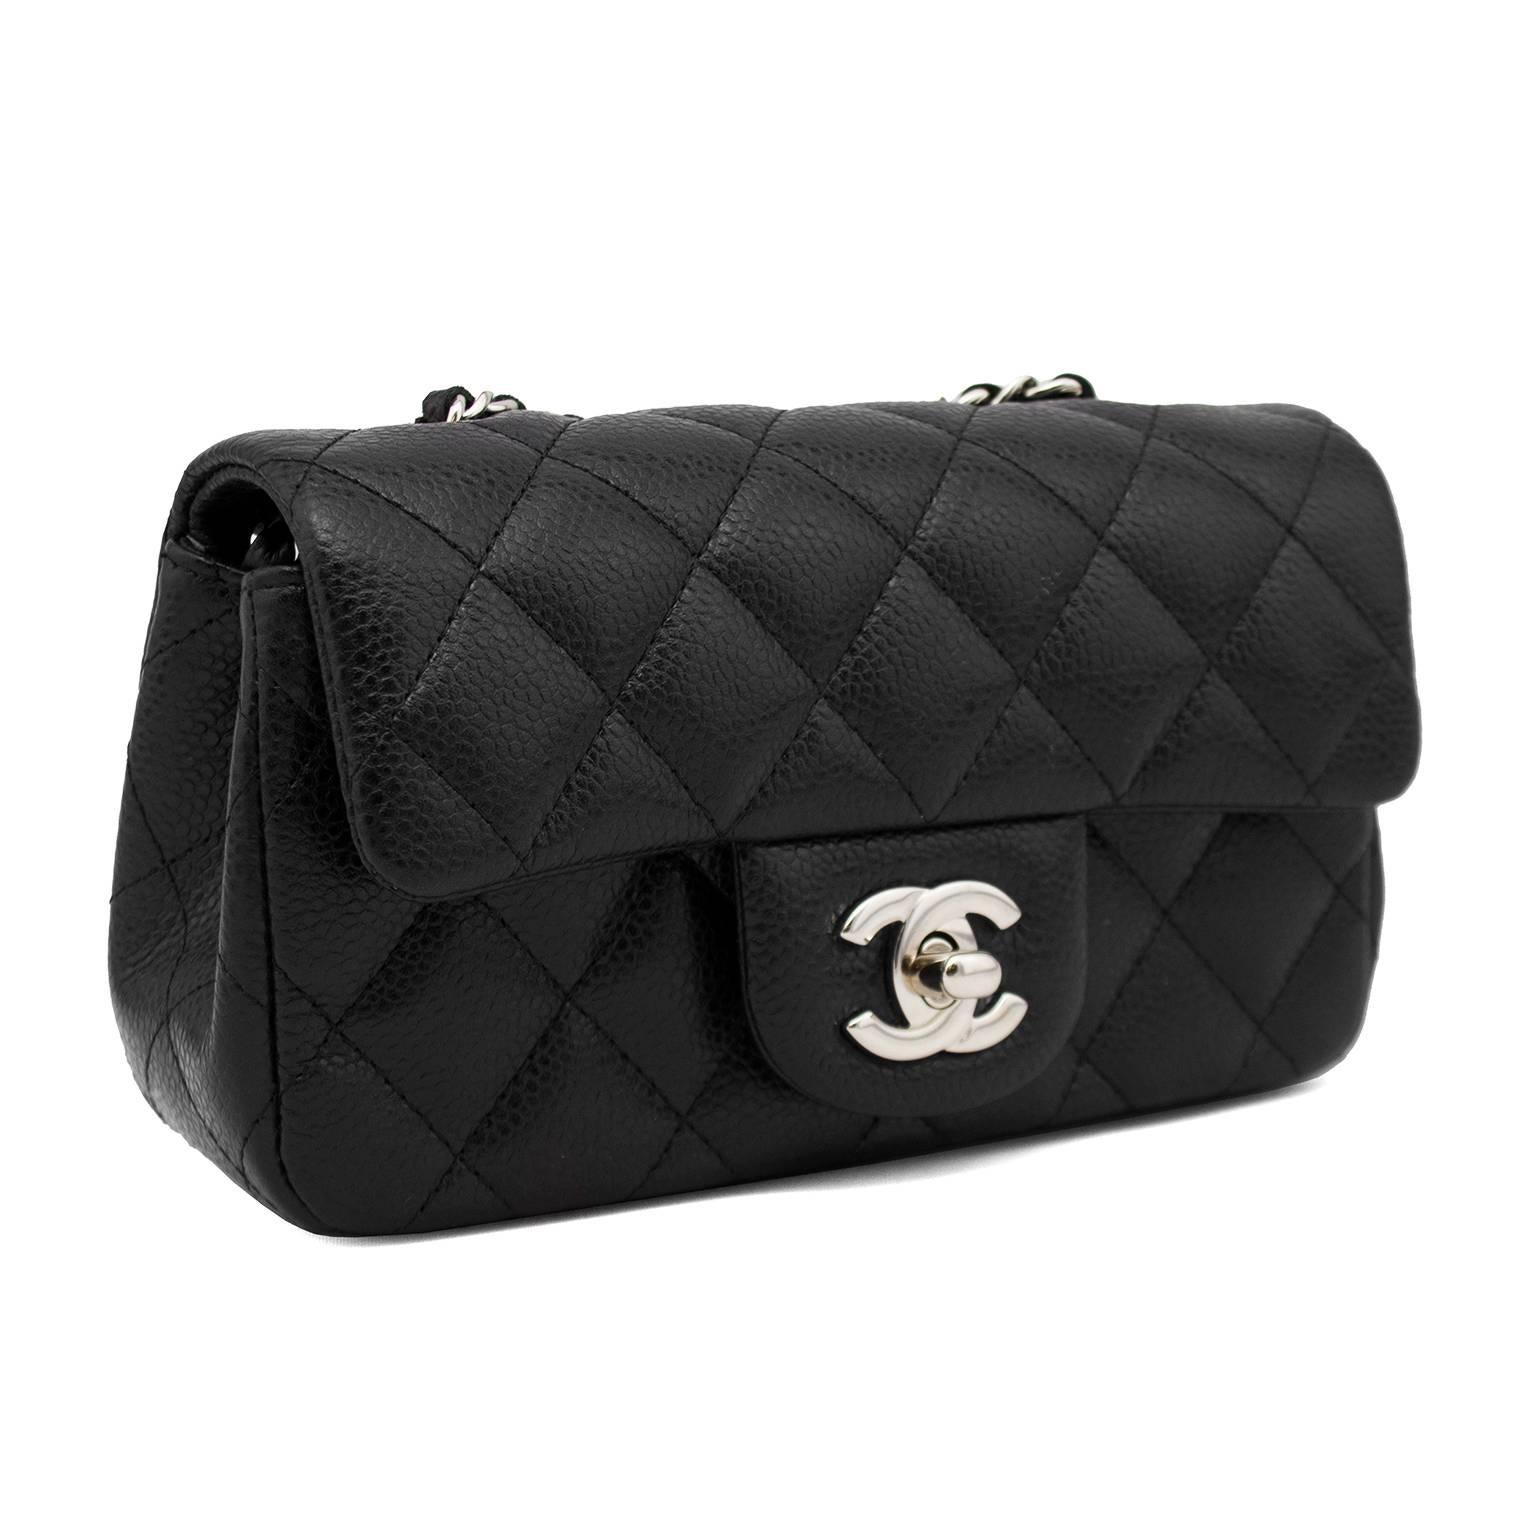 2013 Black quilted Caviar leather Chanel Classic Mini Flap Bag with silver hardware, single shoulder strap with chain-link and leather accents, dual interior compartments with single slit interior pocket.  Flap with CC logo turn-lock closure at